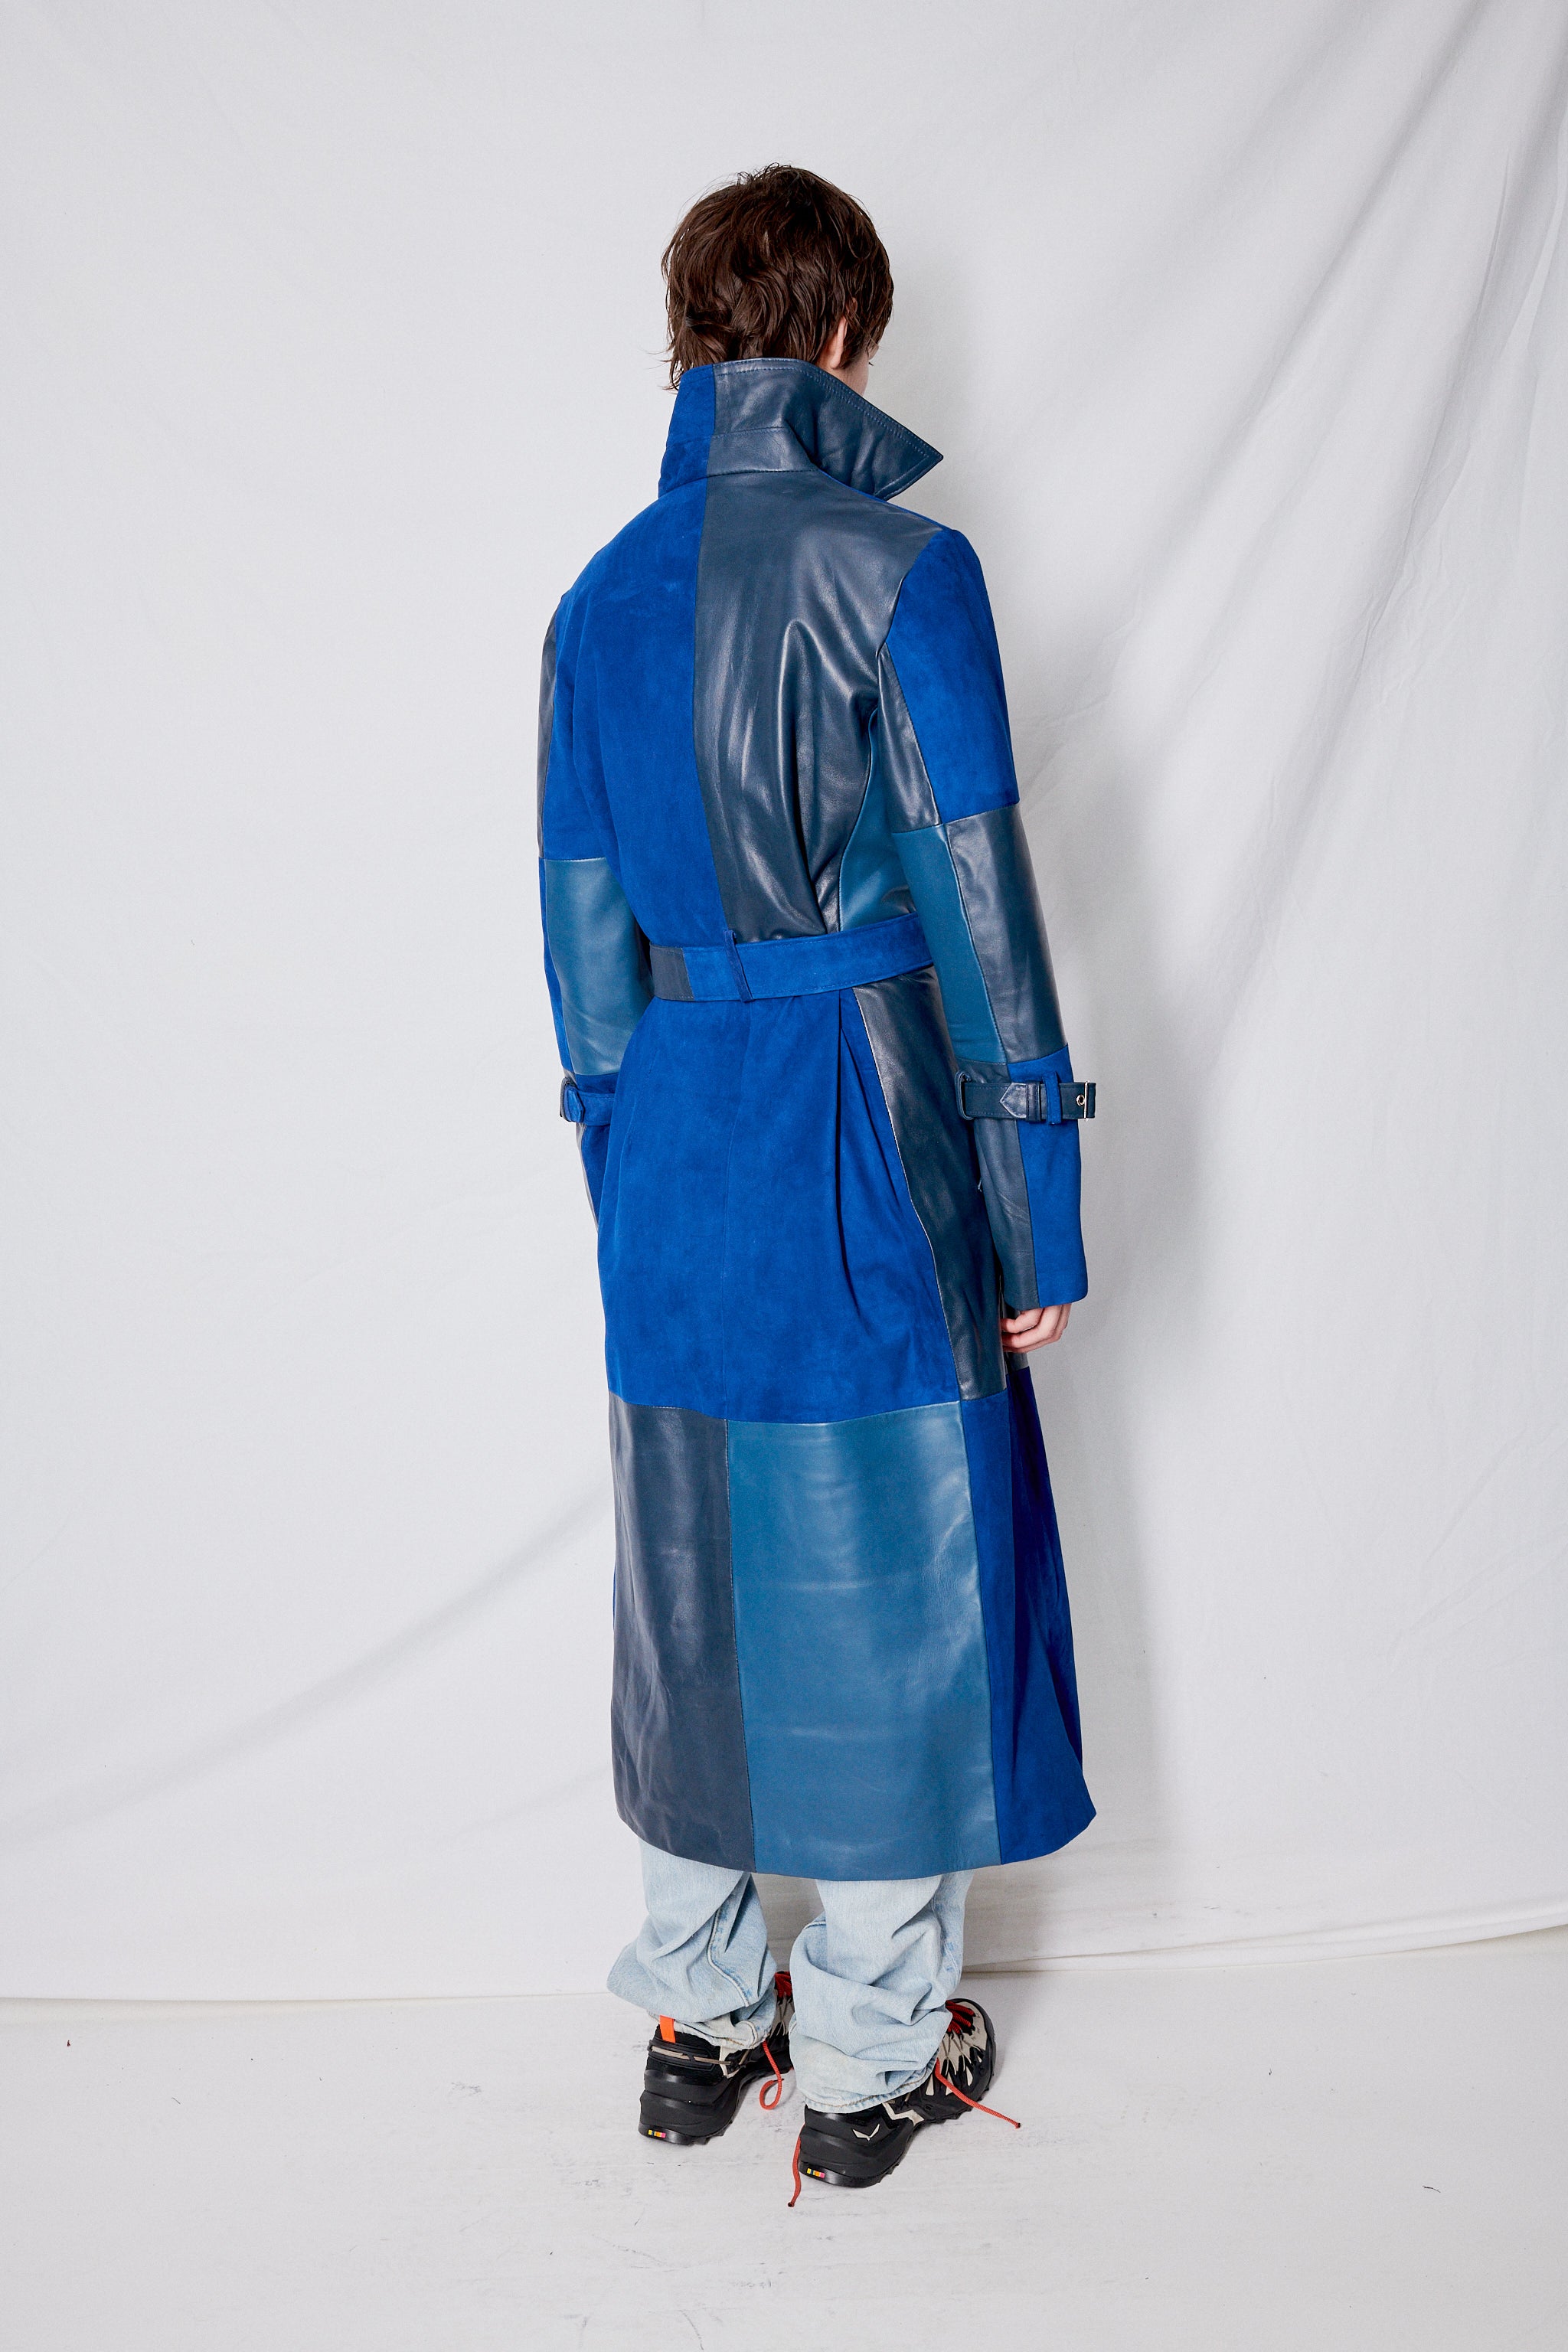 Blue Leather Patchwork Trench